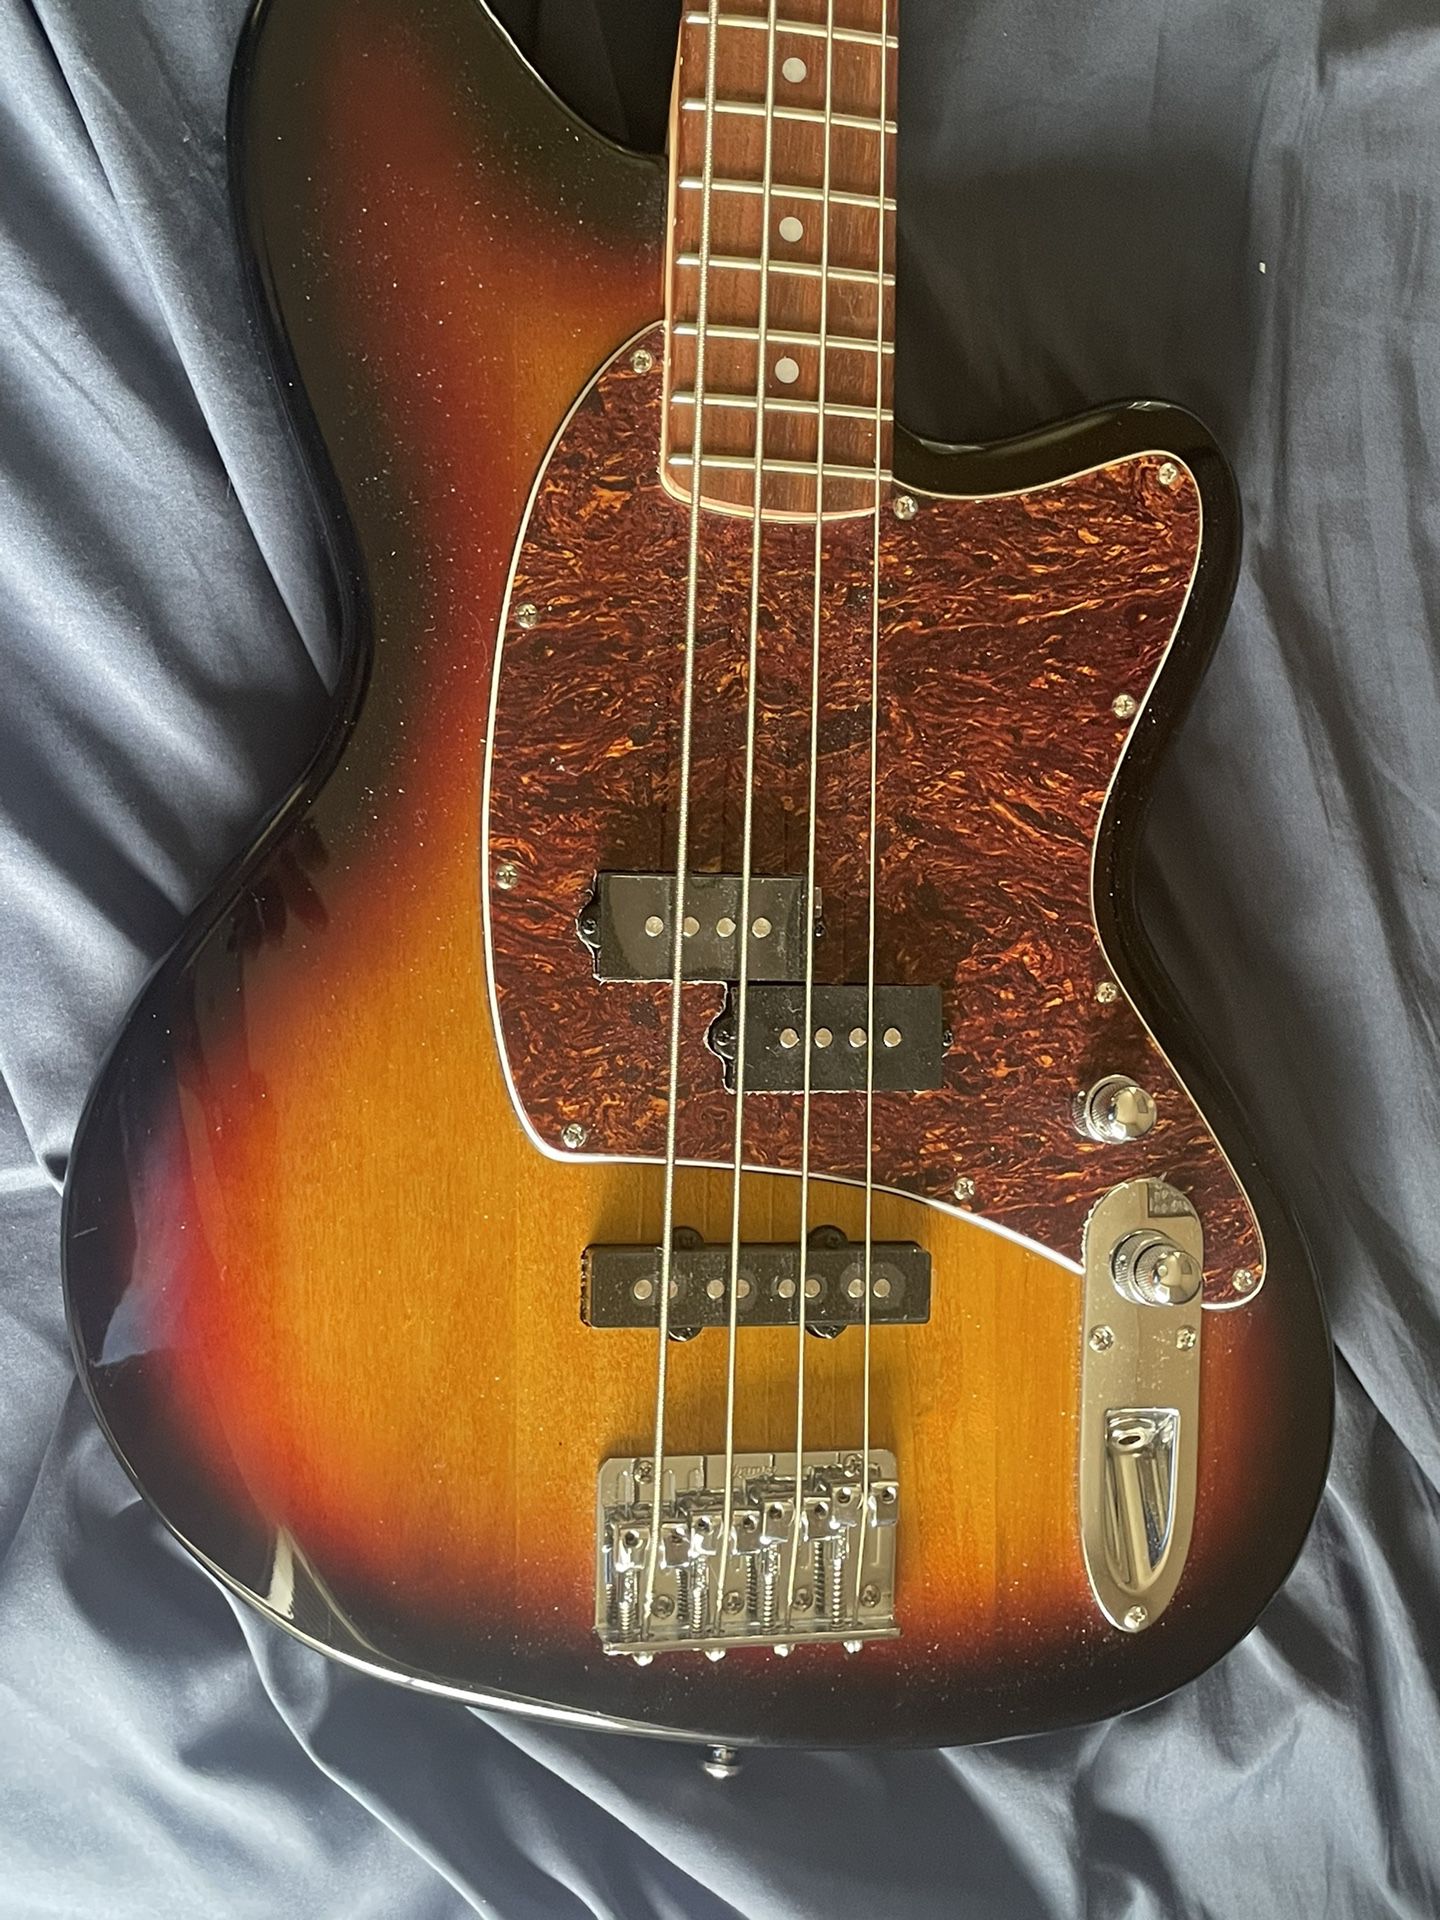 Ibanez Bass Guitar Has Electrical Issues